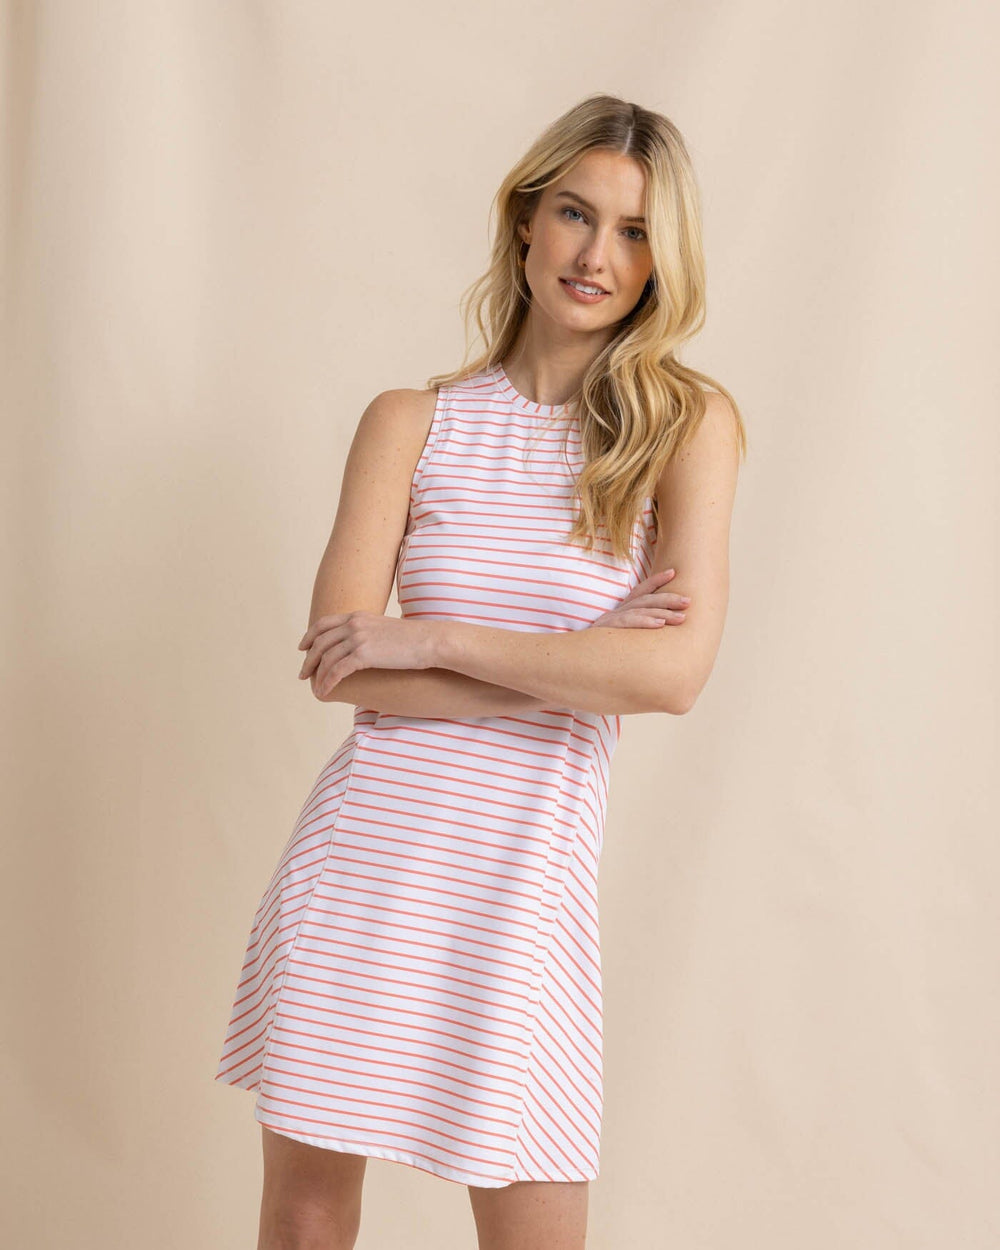 The front view of the Southern Tide Lyllee Striped Performance Dress by Southern Tide - Classic White